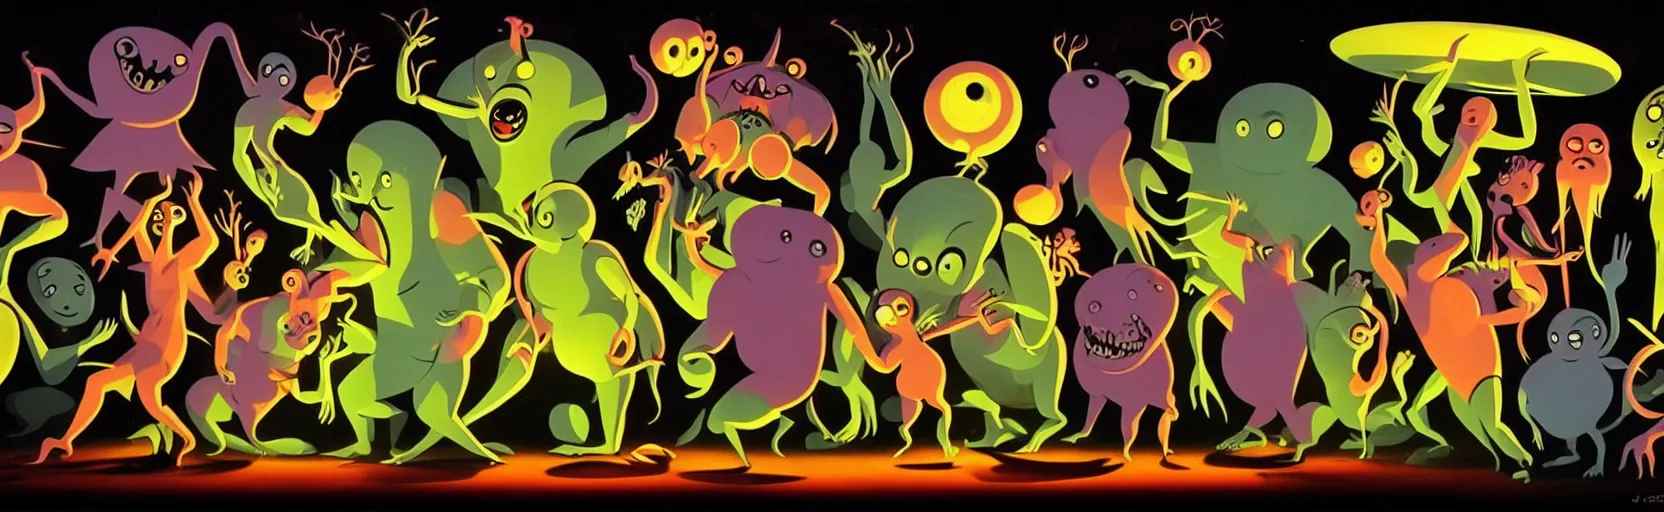 Prompt: whimsical creatures from the depths of the collective unconscious, dramatic lighting, surreal dark 1 9 3 0 s fleischer cartoon characters